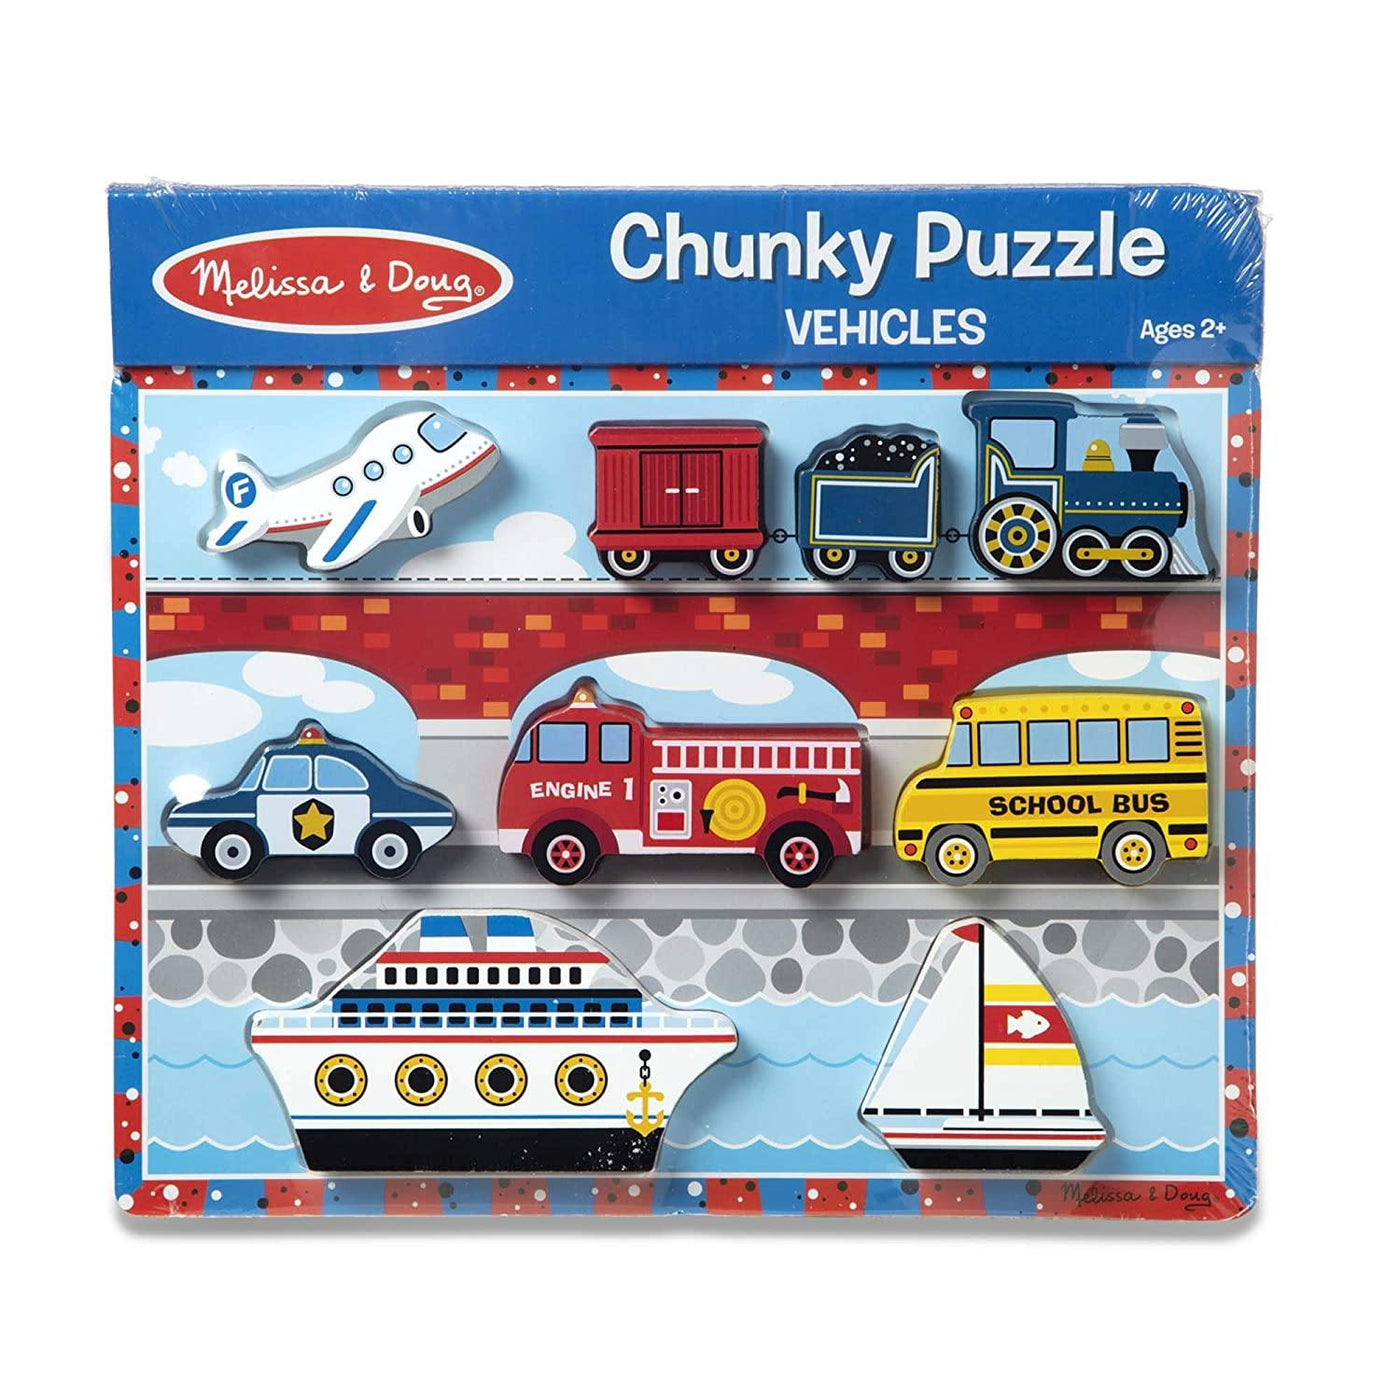 Chunky Puzzle Vehicles - Krazy Caterpillar 